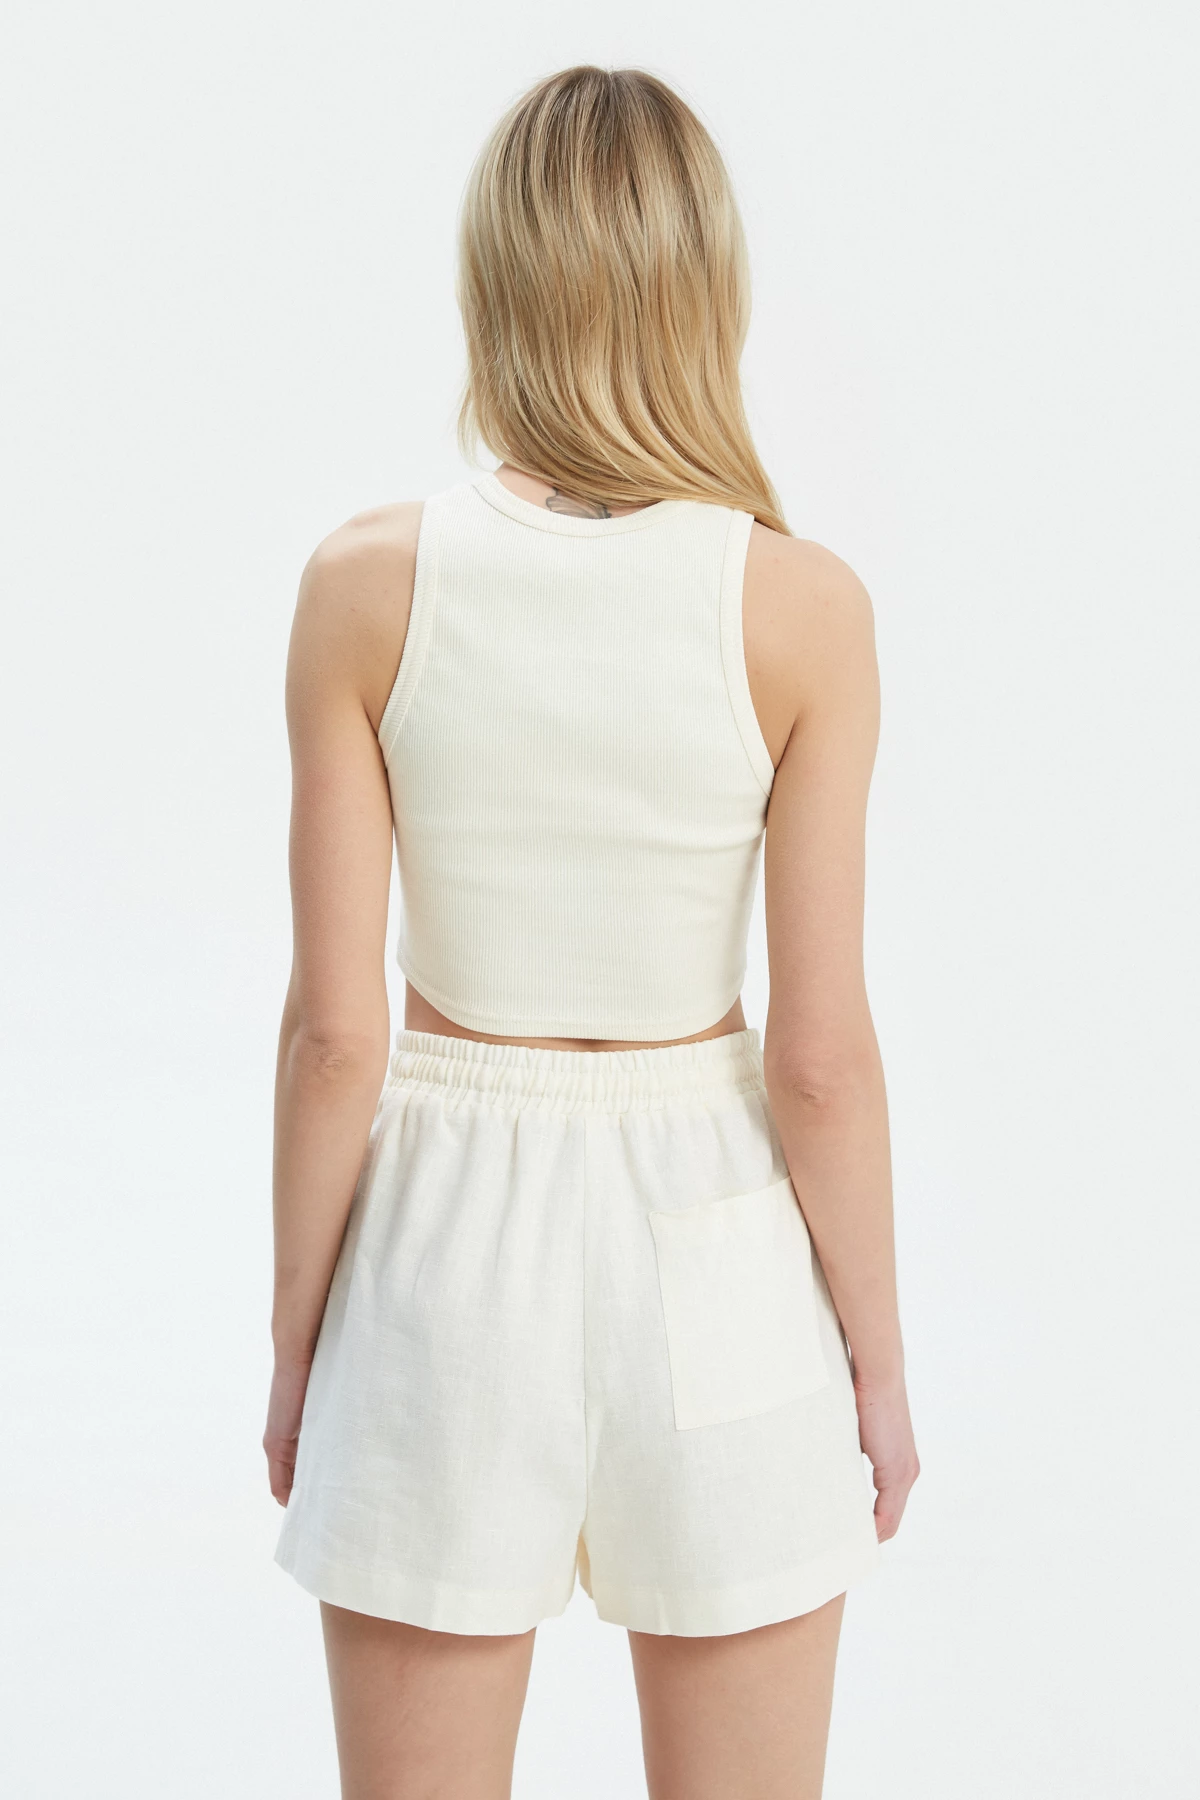 Milky loose-fit shorts made of 100% linen, photo 3